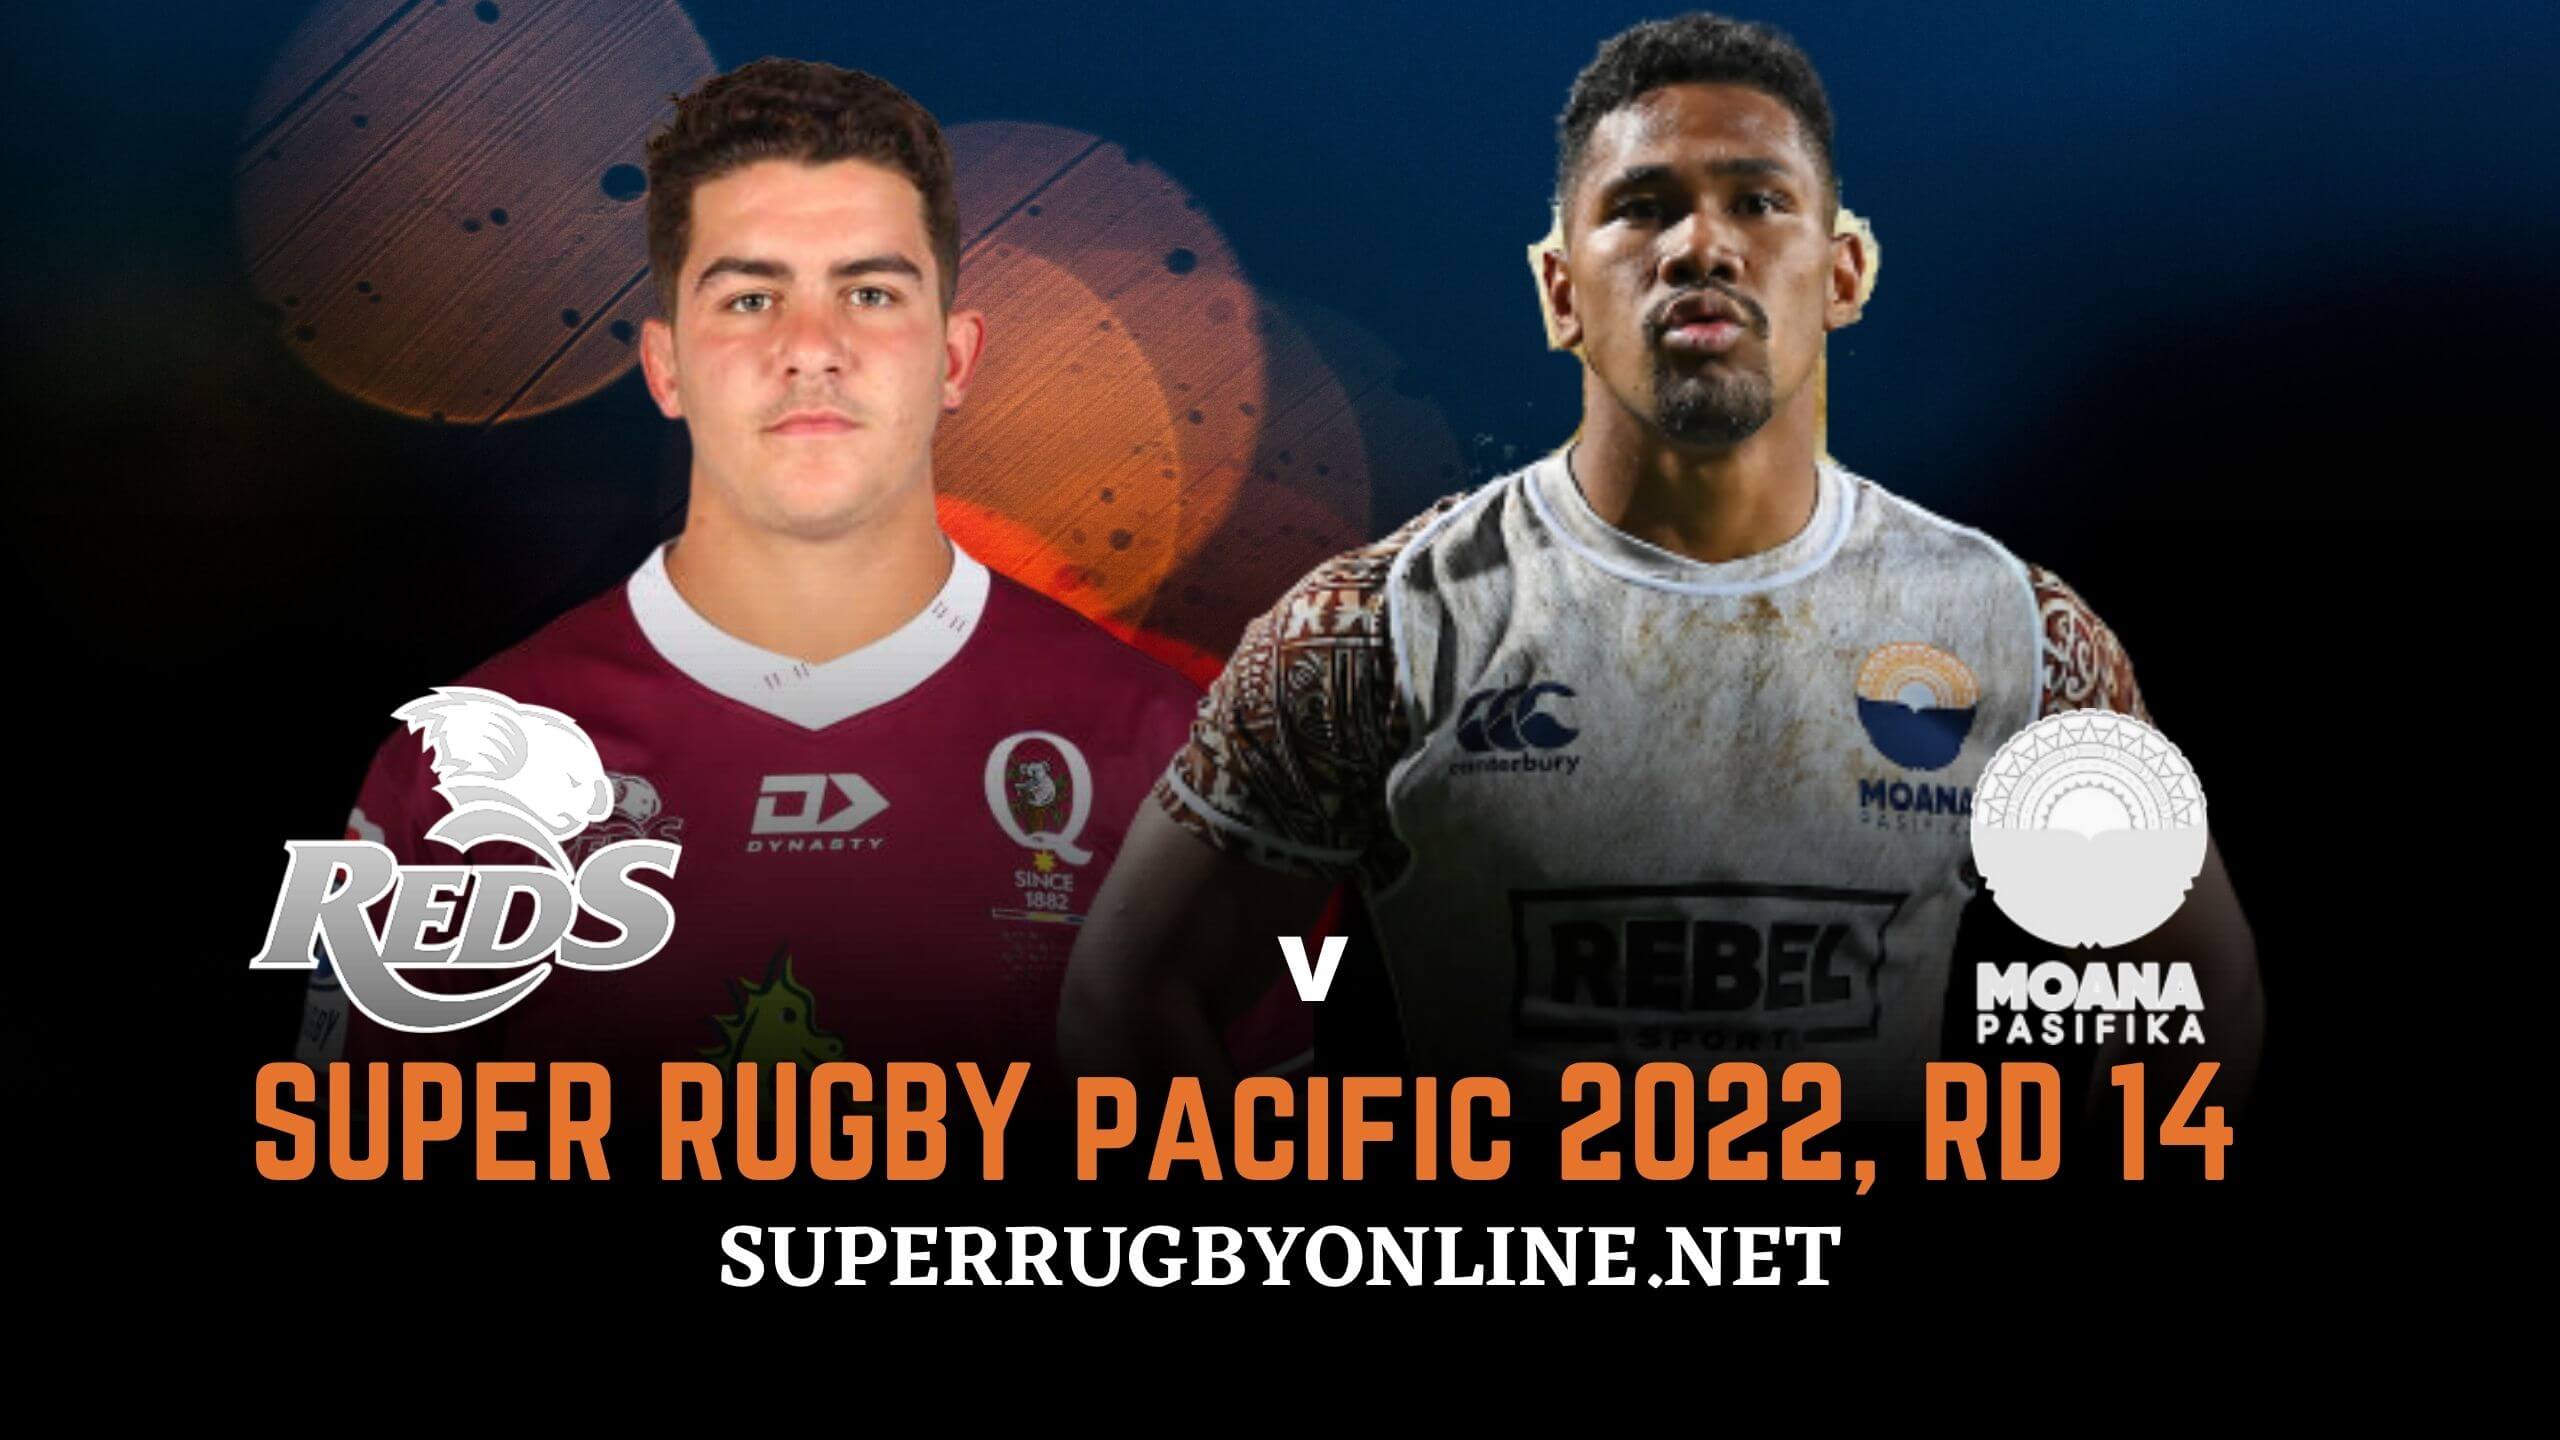 Reds Vs Moana Pasifika Live Stream 2022 | Match Replay | Super Rugby Pacific slider